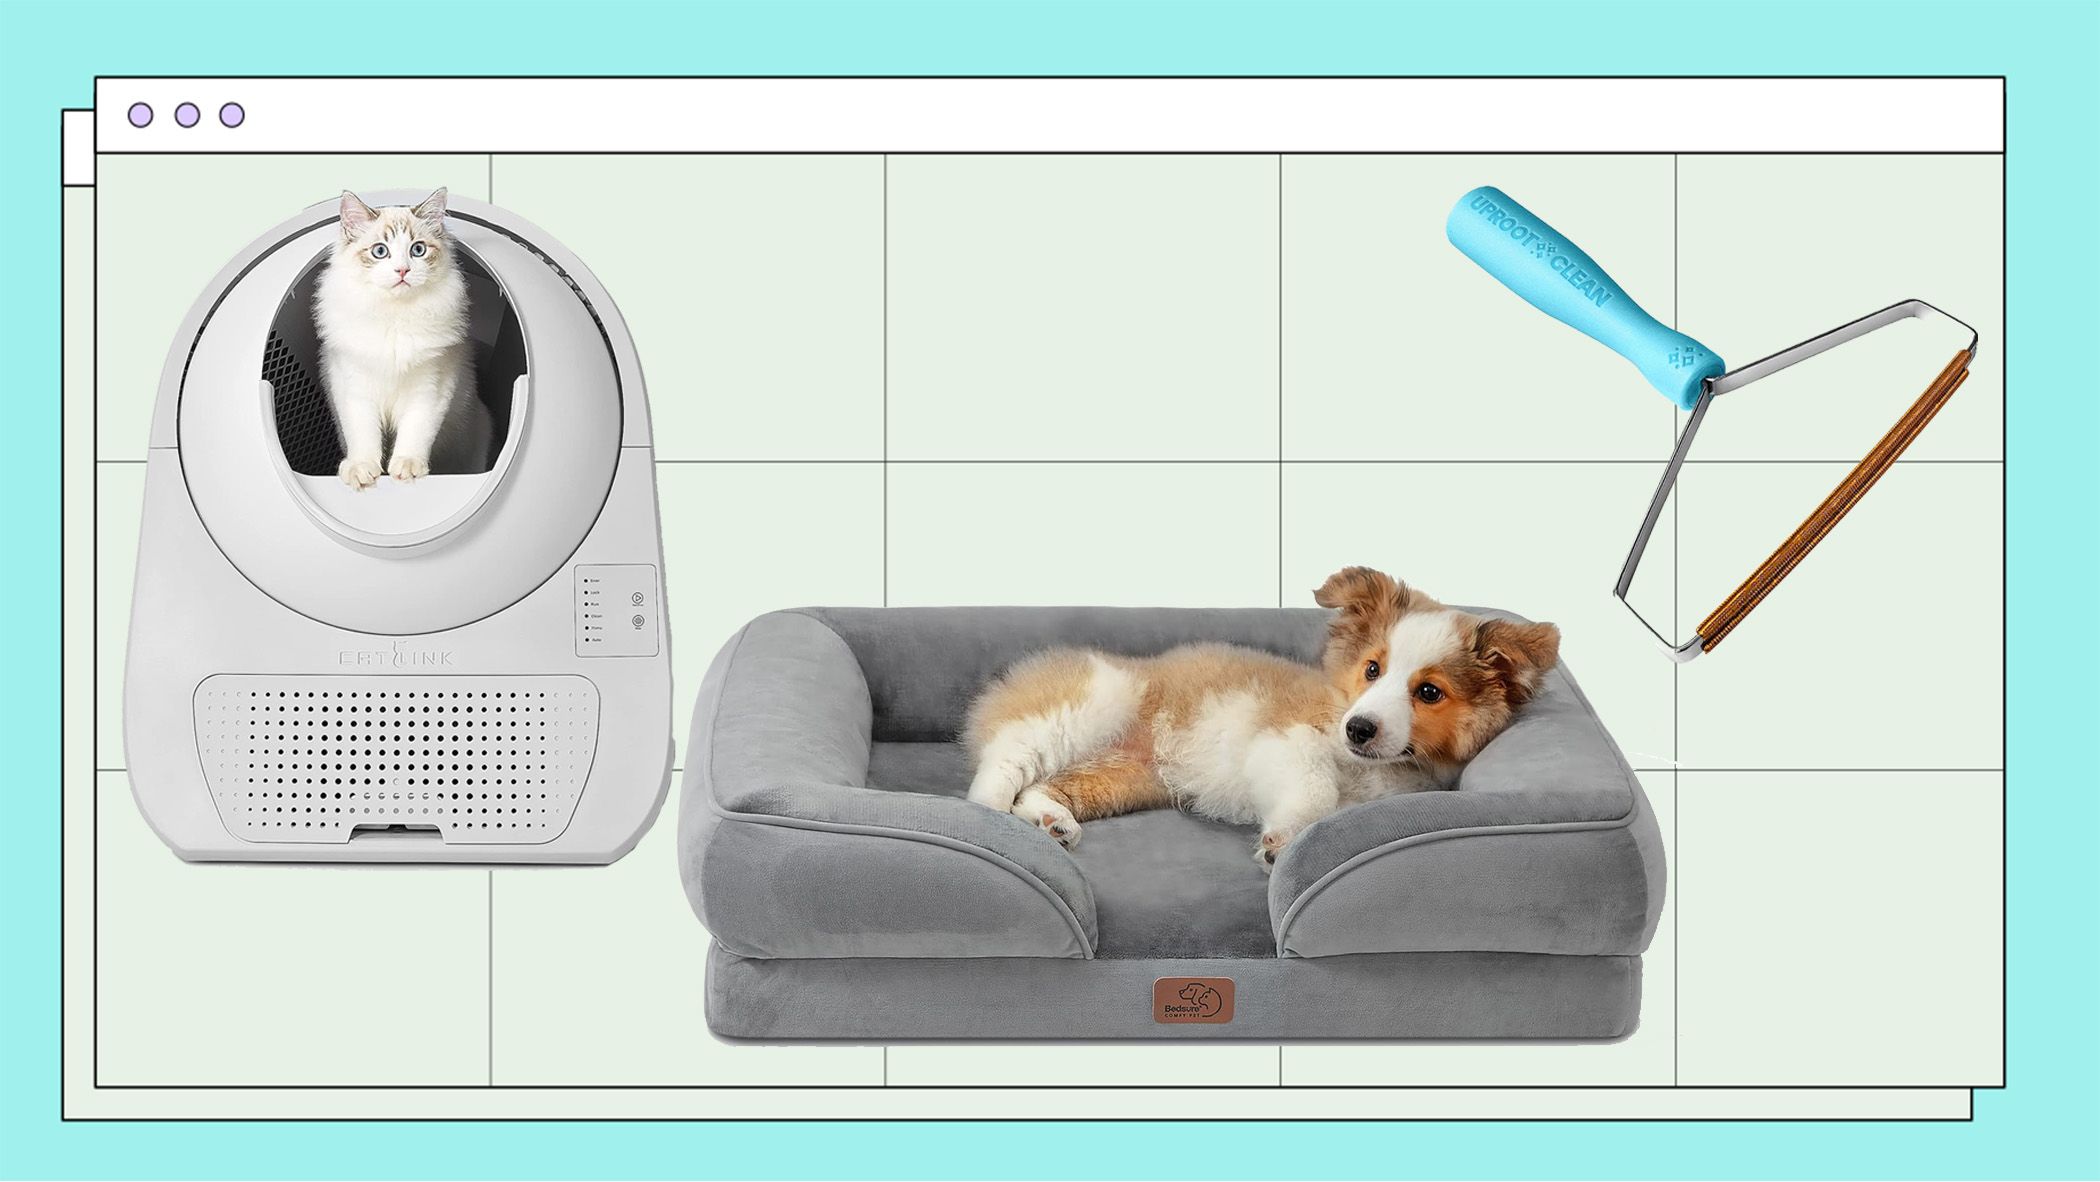 Spoil your dog with these toys, treats, beds and more - Good Morning America